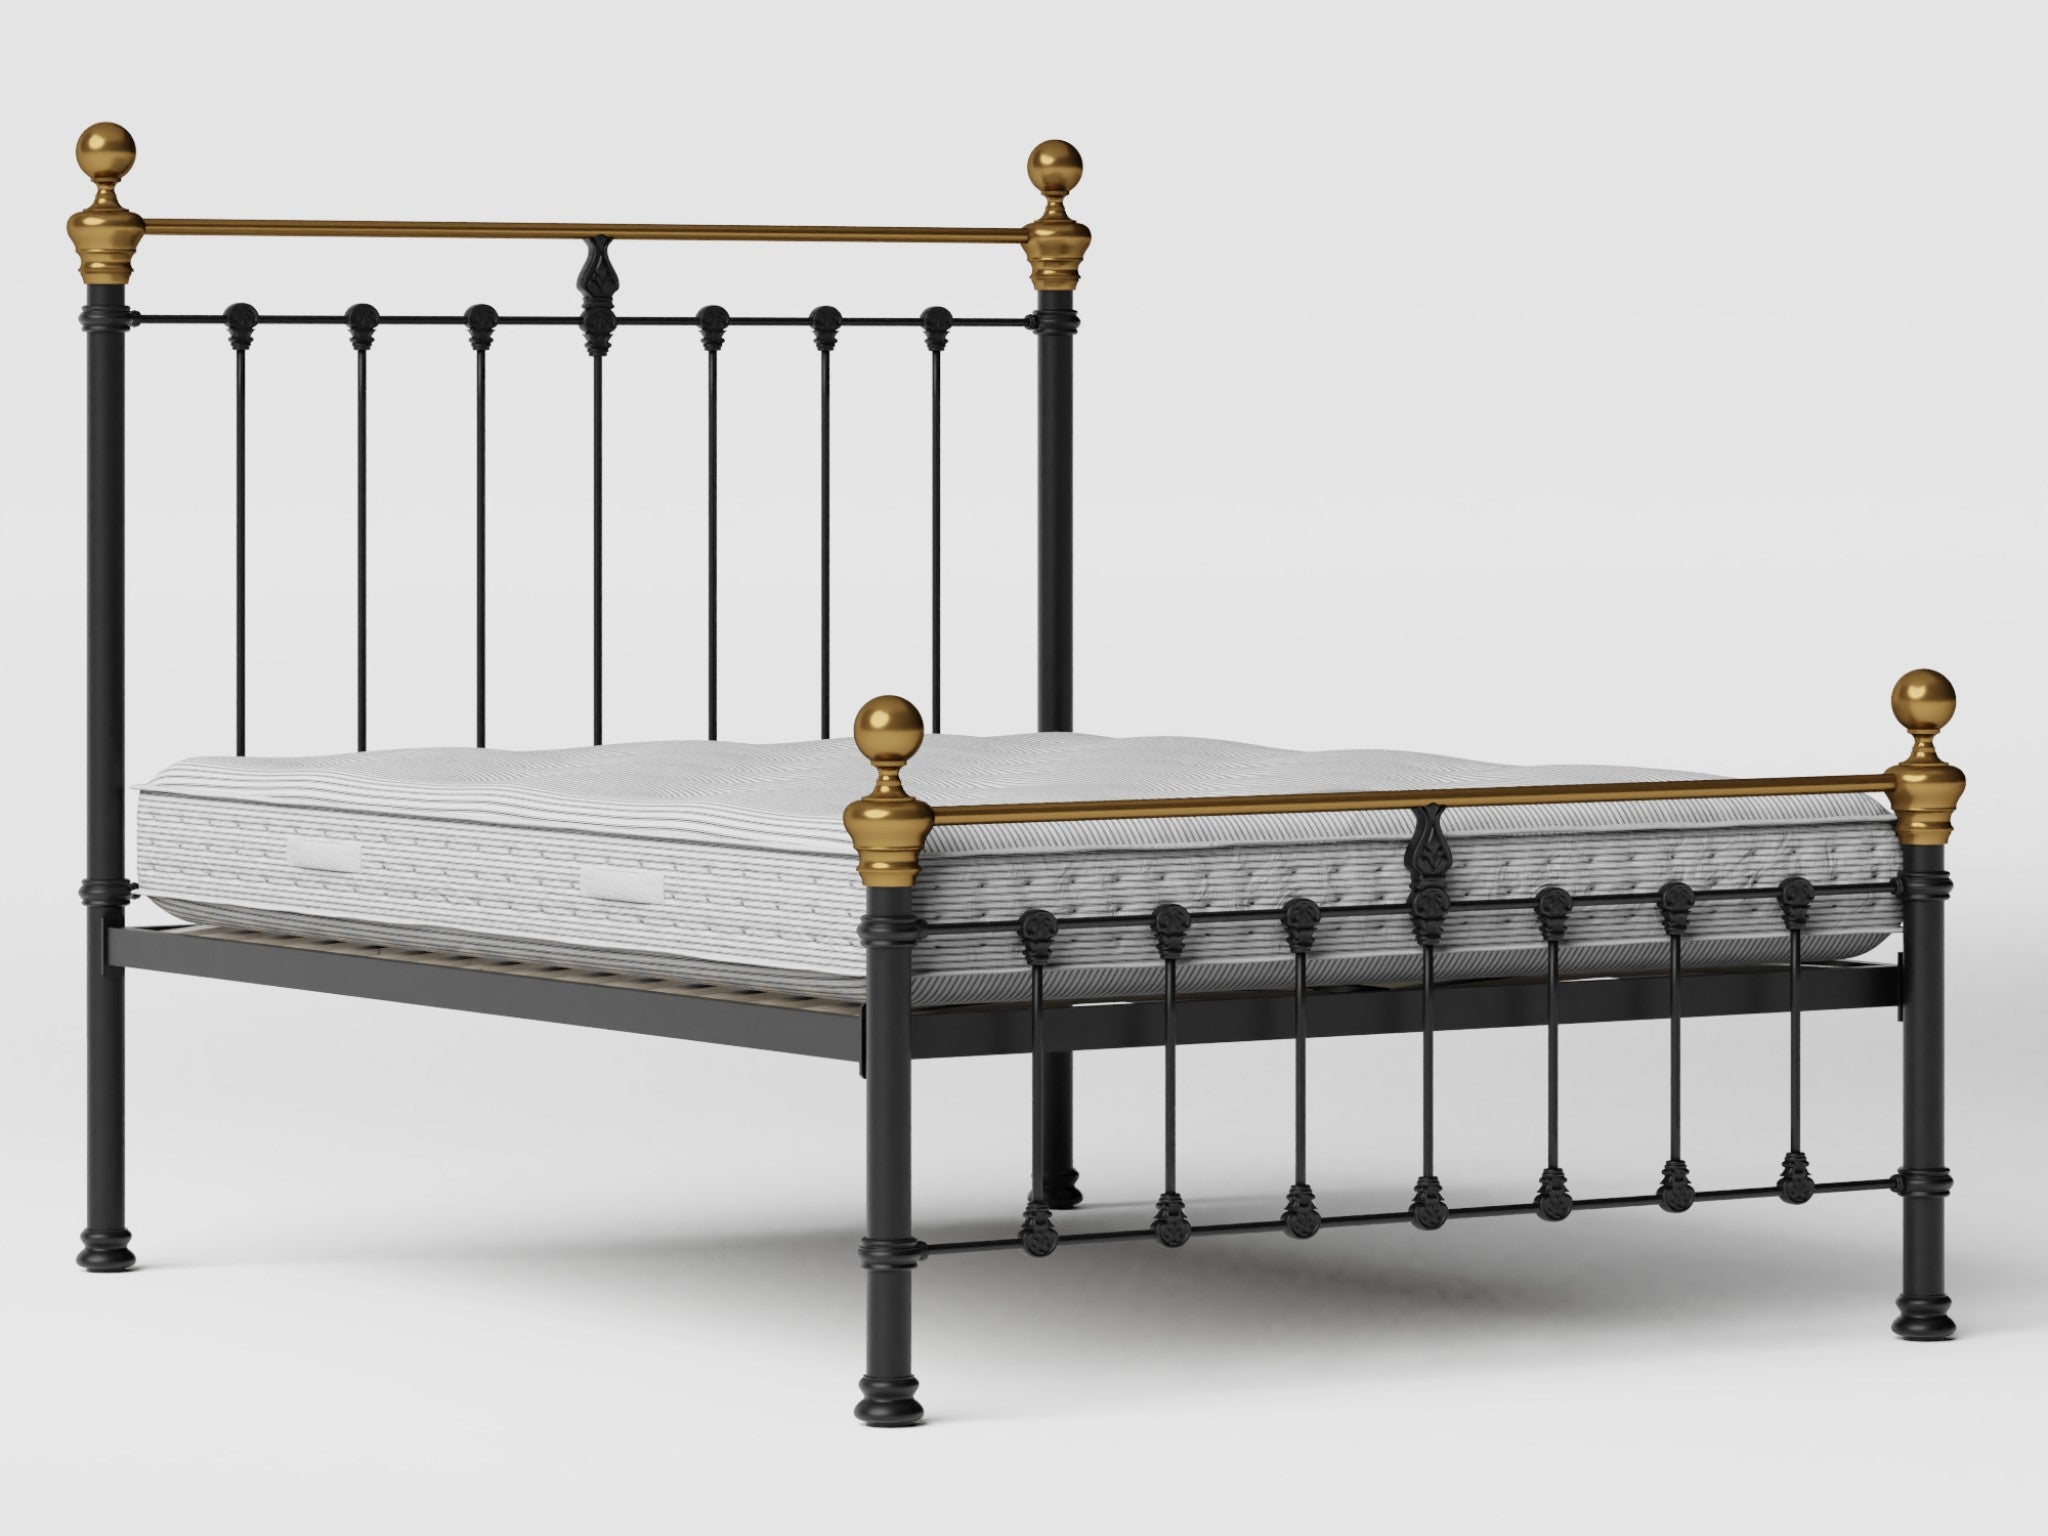 The Original Bed Co. hamilton low footend iron_metal bed frame_ Small double indybest.jpg